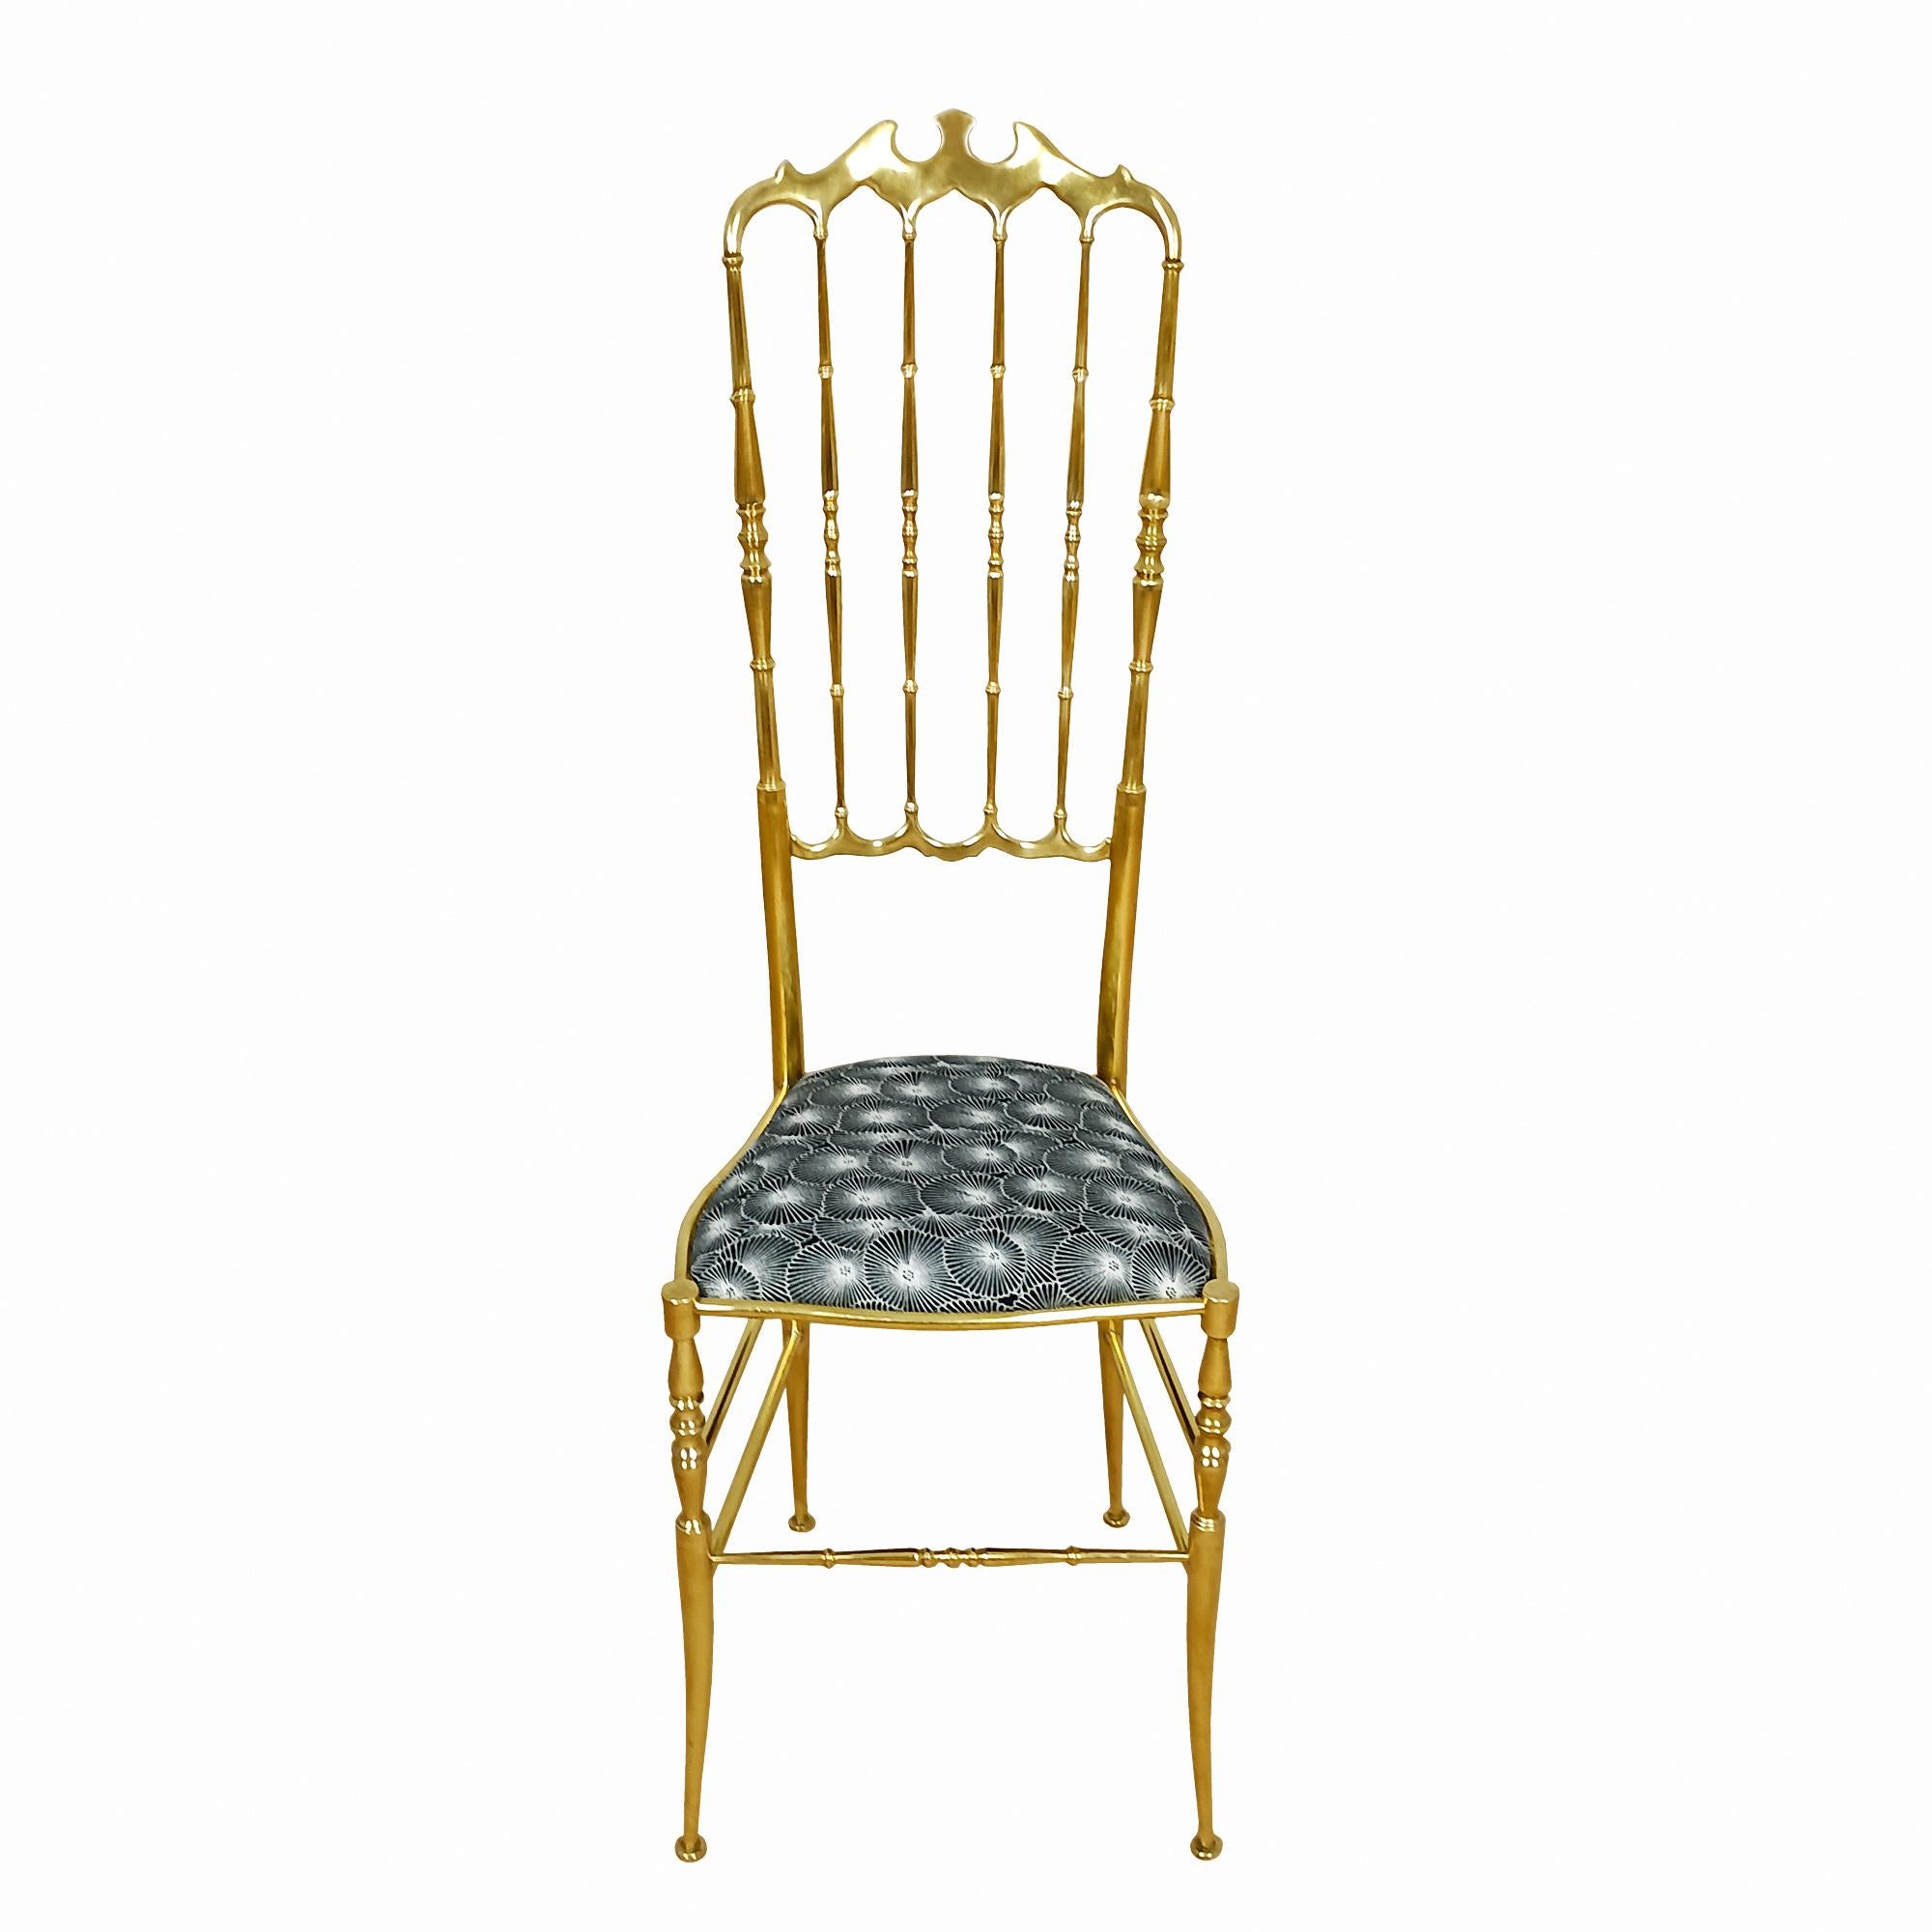 Italian Pair of Mid-Century Modern Chiavari Chairs with Japanese Fabric, Italy, 1940 For Sale